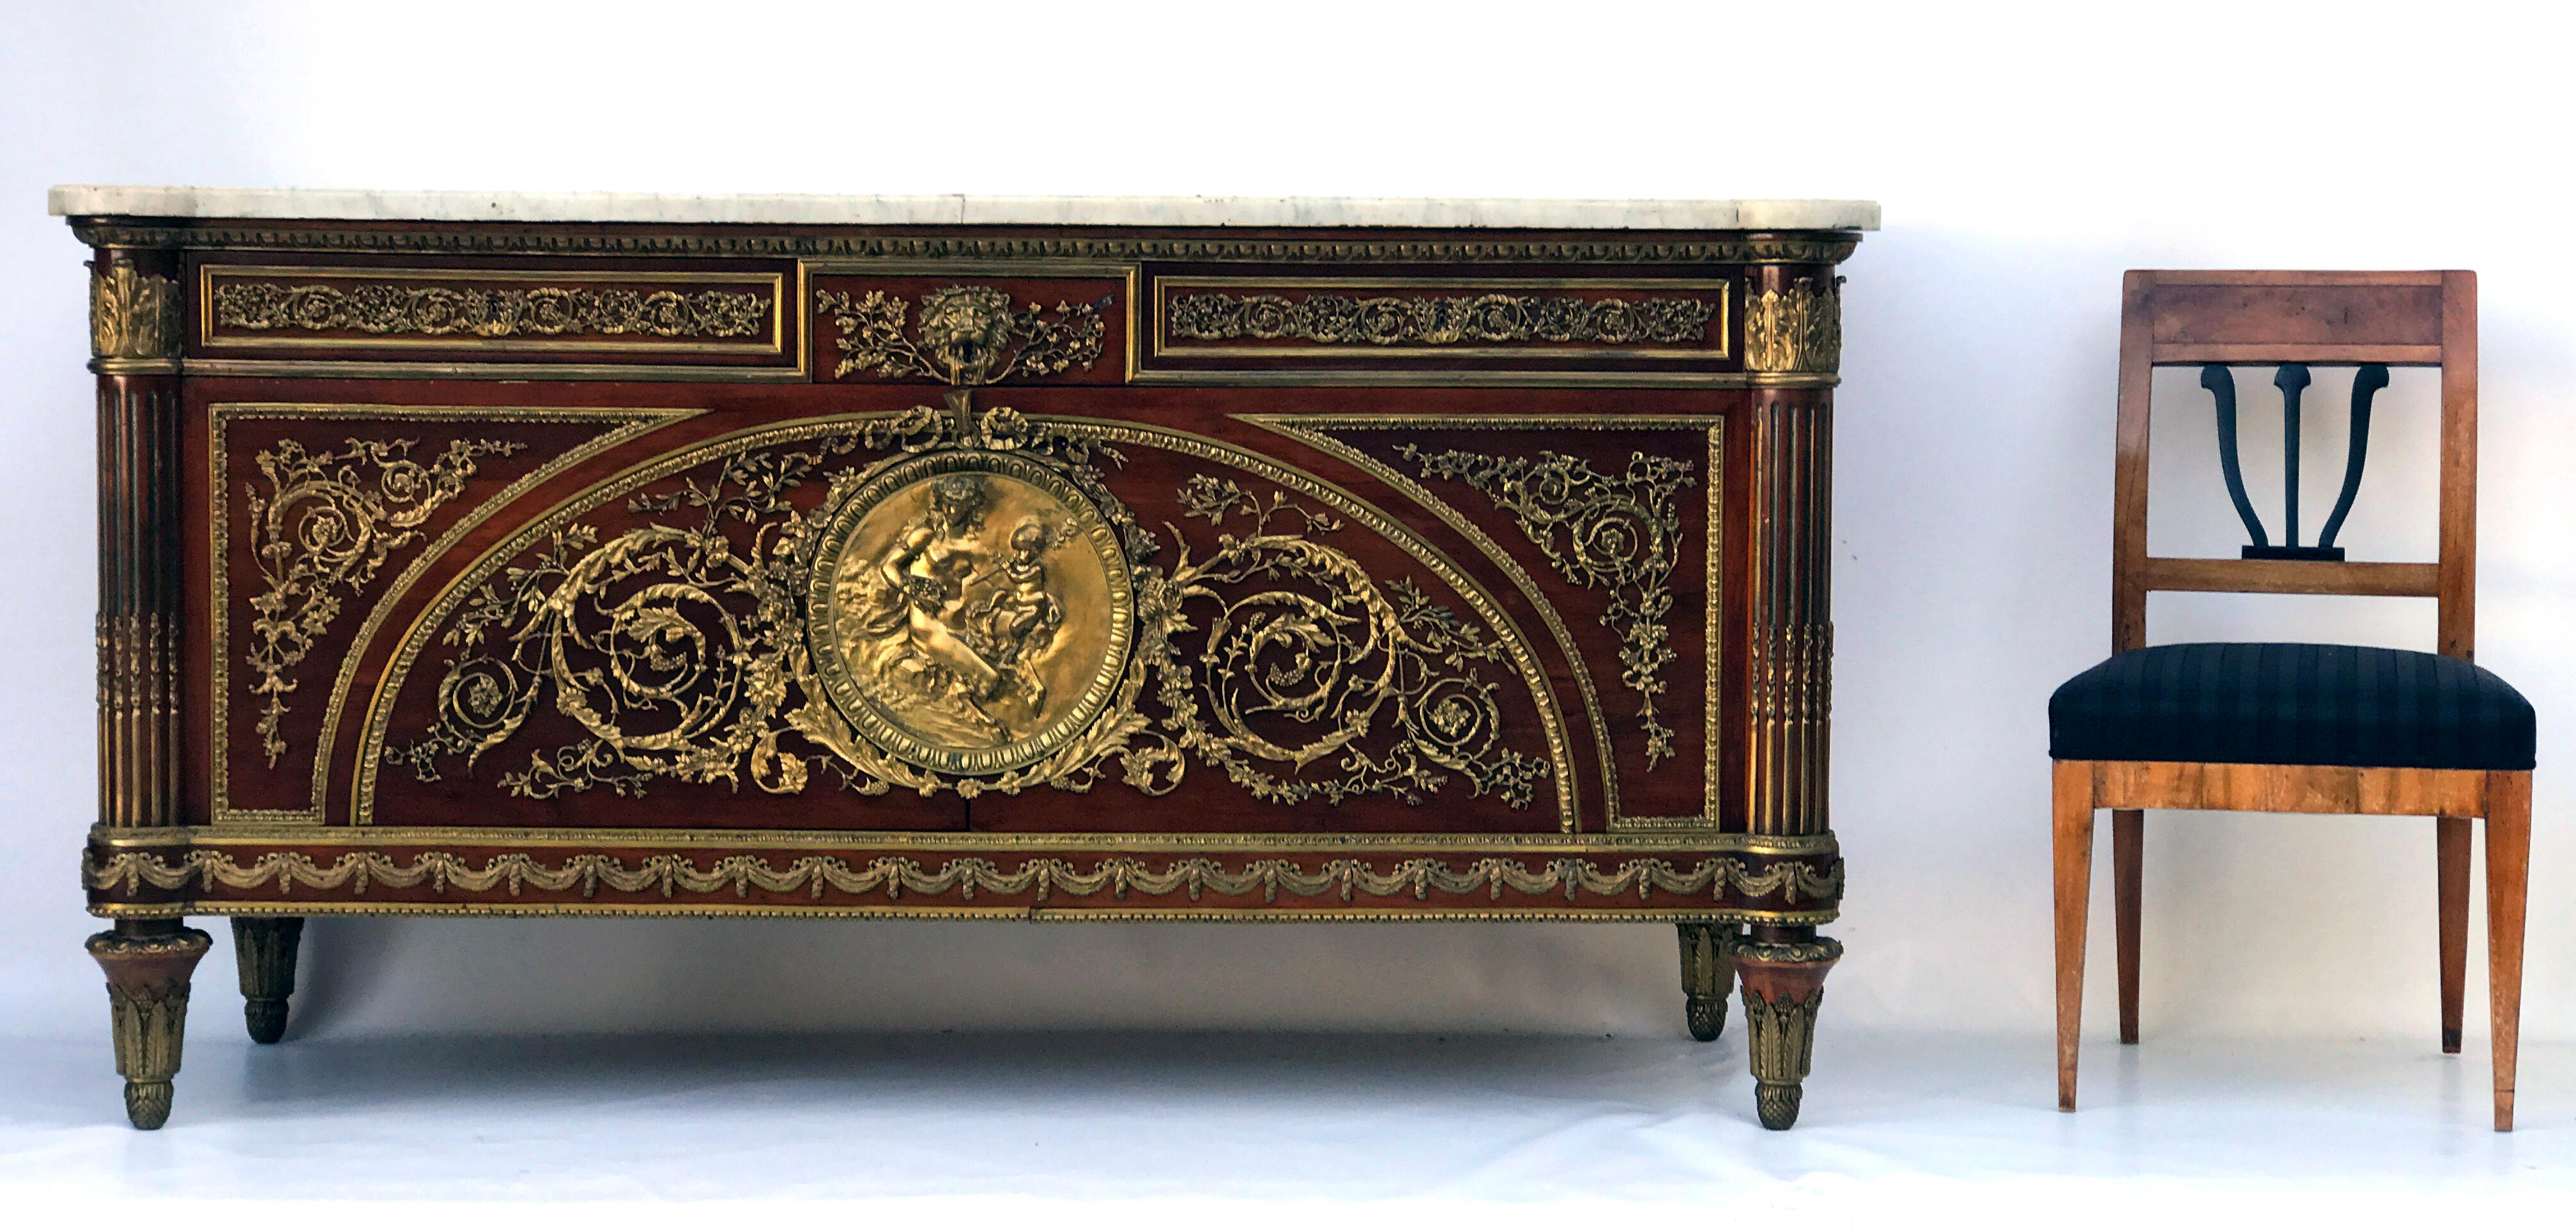 Large Louis XVI dresser, signed Paul Sormani, Paris, 1890s. Made of solid mahagony, walnut, and oak.

This courtly dresser comes from the workshop of the prominent Parisian cabinetmaker ebenist Paul Sormani and is signed below the top plate. It